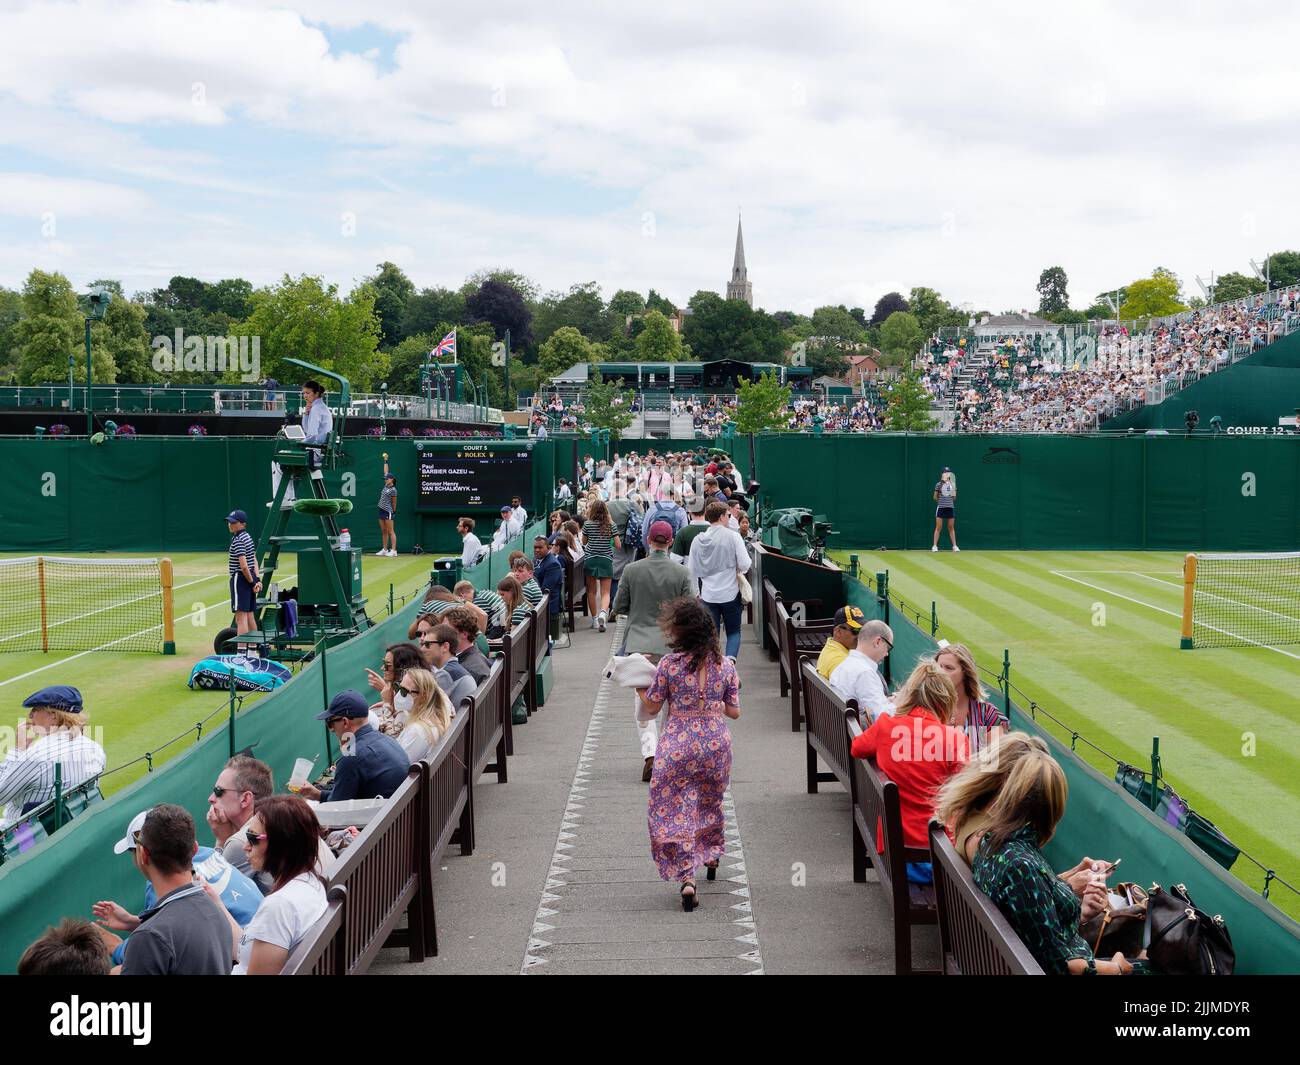 Wimbledon, Greater London, England, July 02 2022: Wimbledon Tennis Championship. Walkway between outside courts, spectators and an umpire and ball boy Stock Photo